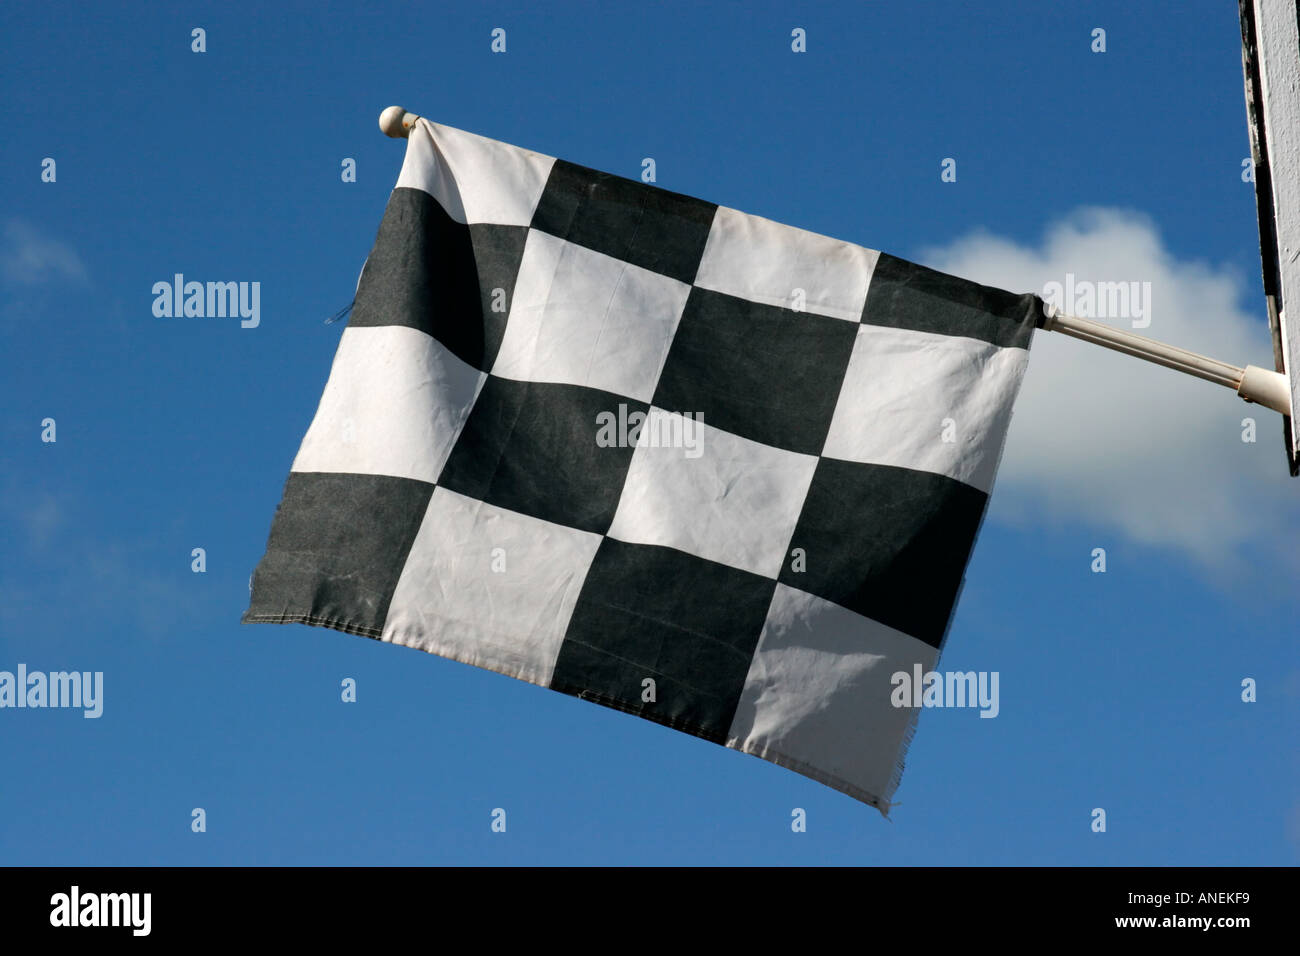 Chequered black and white flag against blue sky Stock Photo